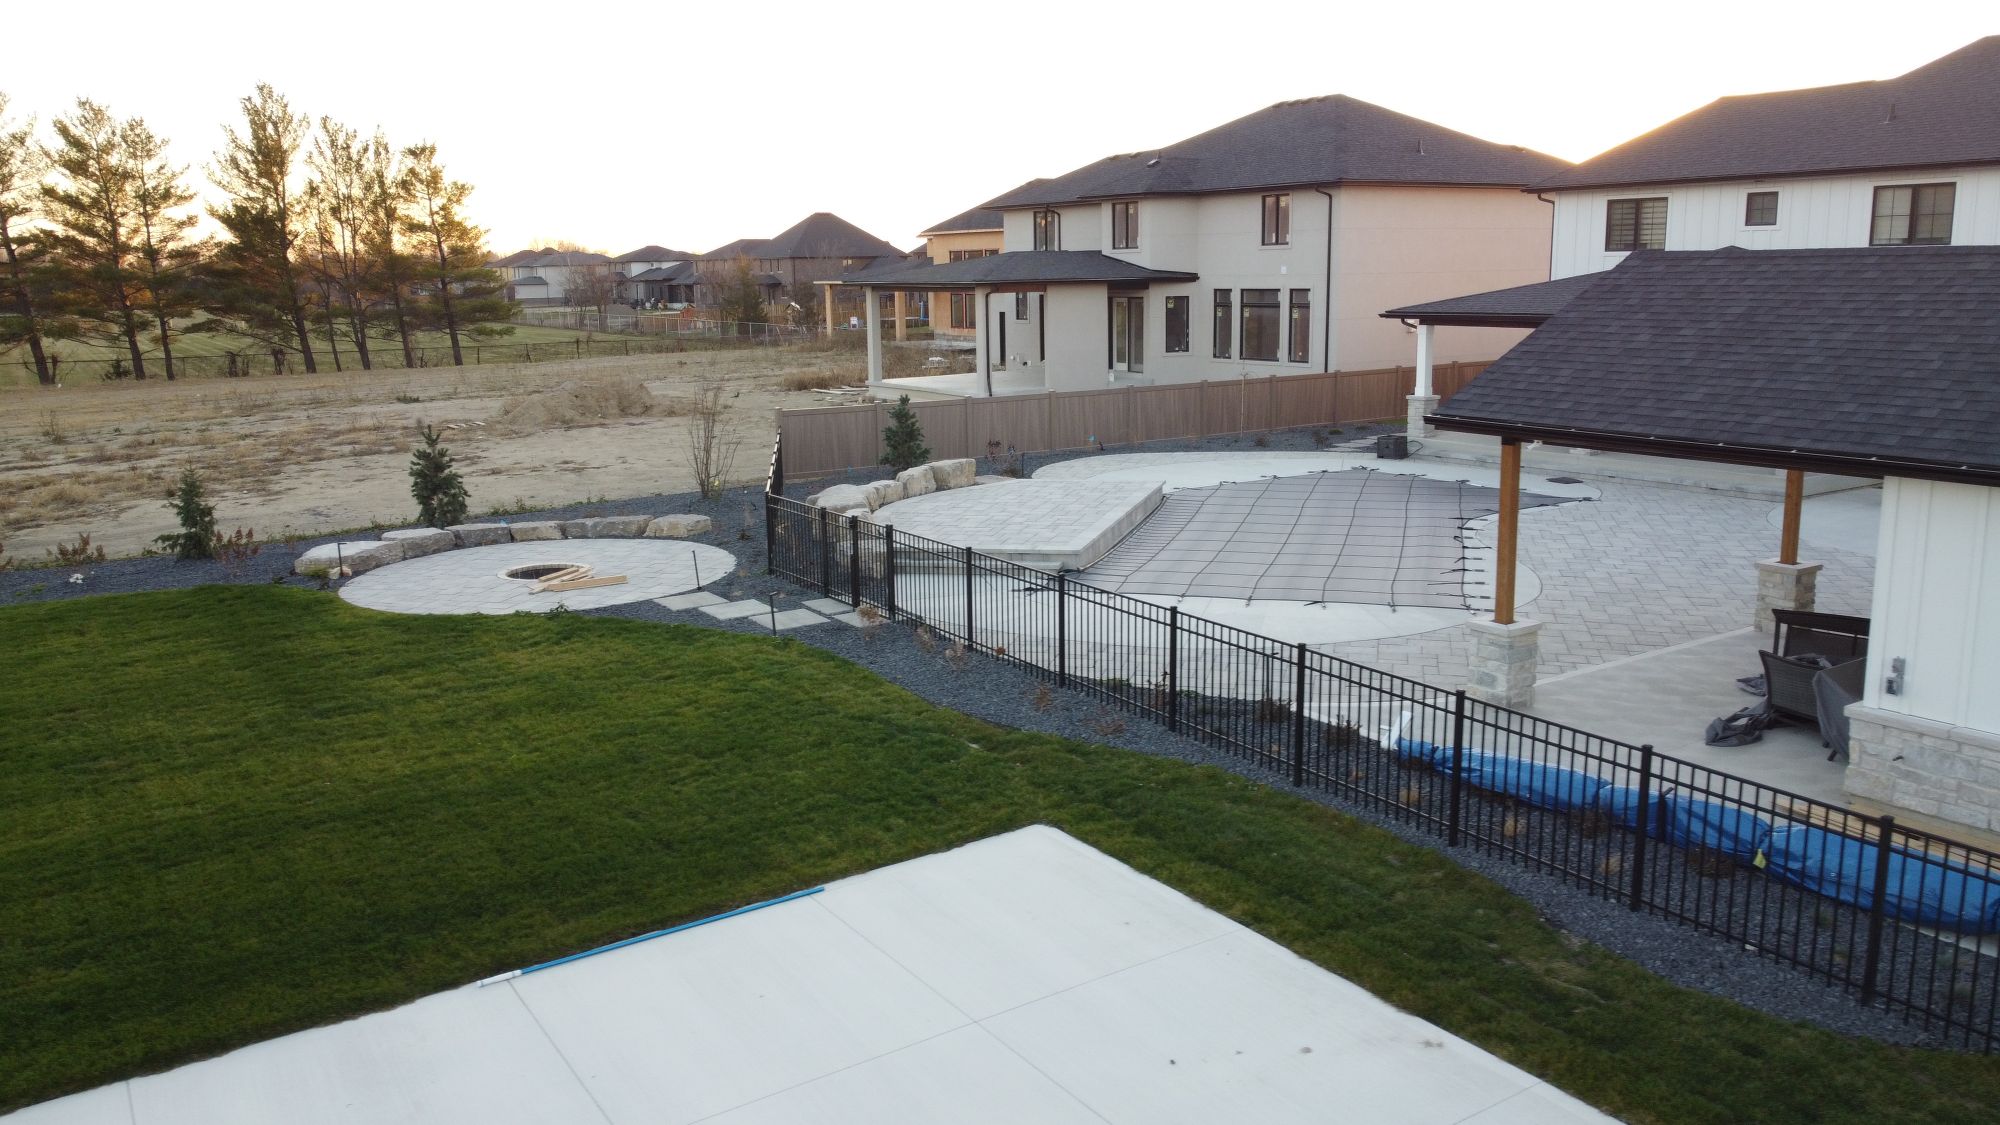 Working with North42 Landscaping (unfortunately now defunct) and Bluewater pools to build this hardscaped entertaining area - we ran Homewood Green Teak down the sides of the property, then blended the aluminum fence line to the grade then curved prior to the fire pit area.